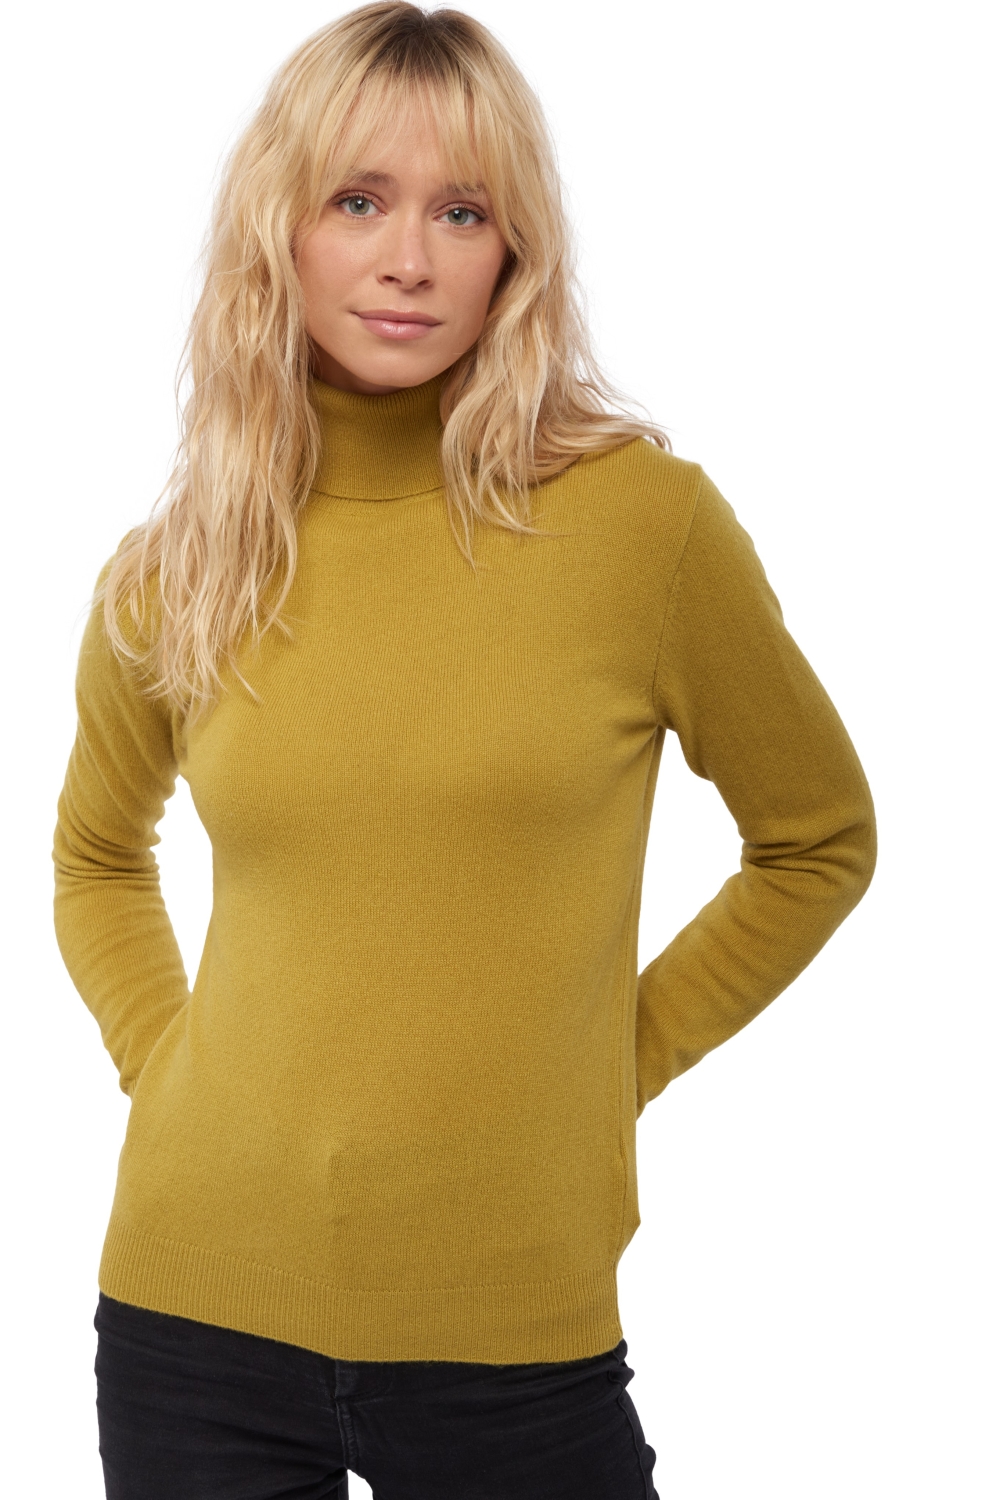 Cashmere ladies basic sweaters at low prices tale first caterpillar xs